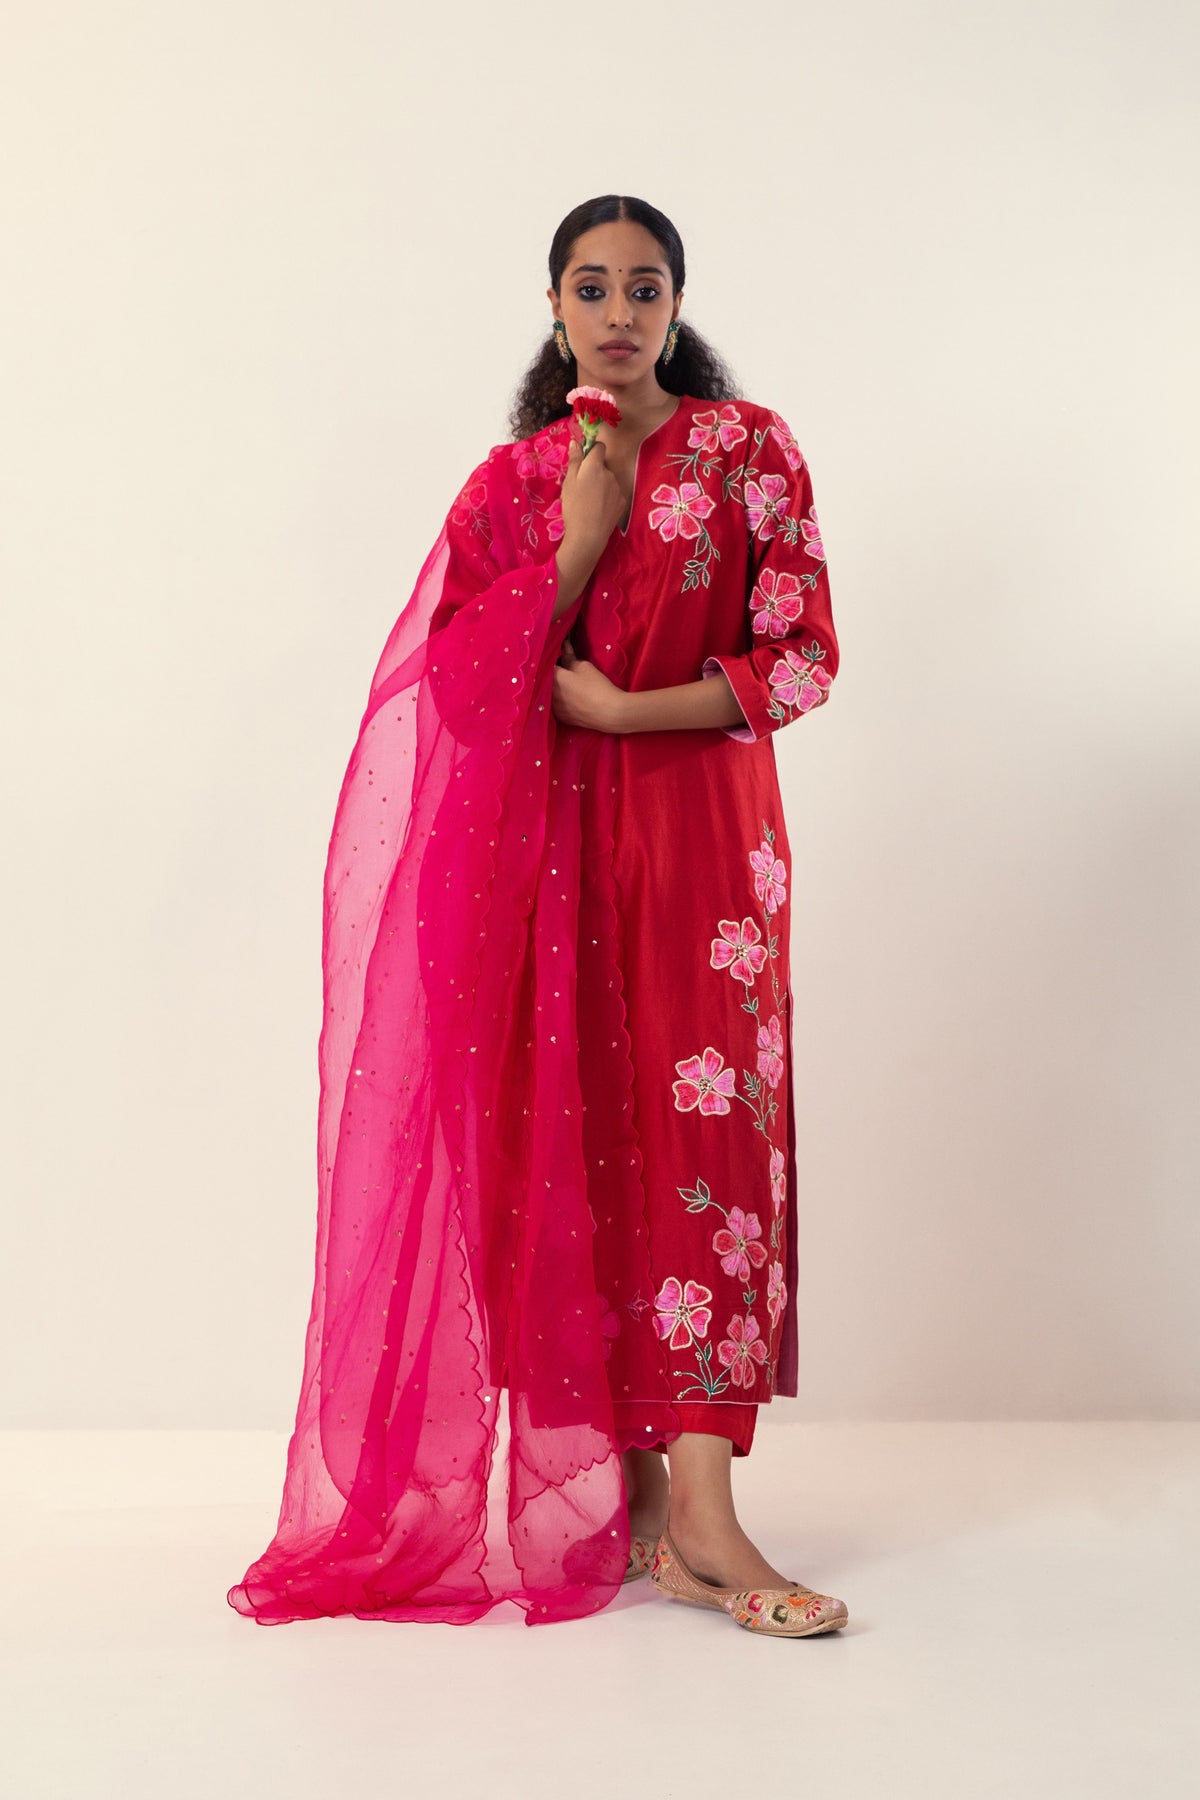 Floral Kurta in Red